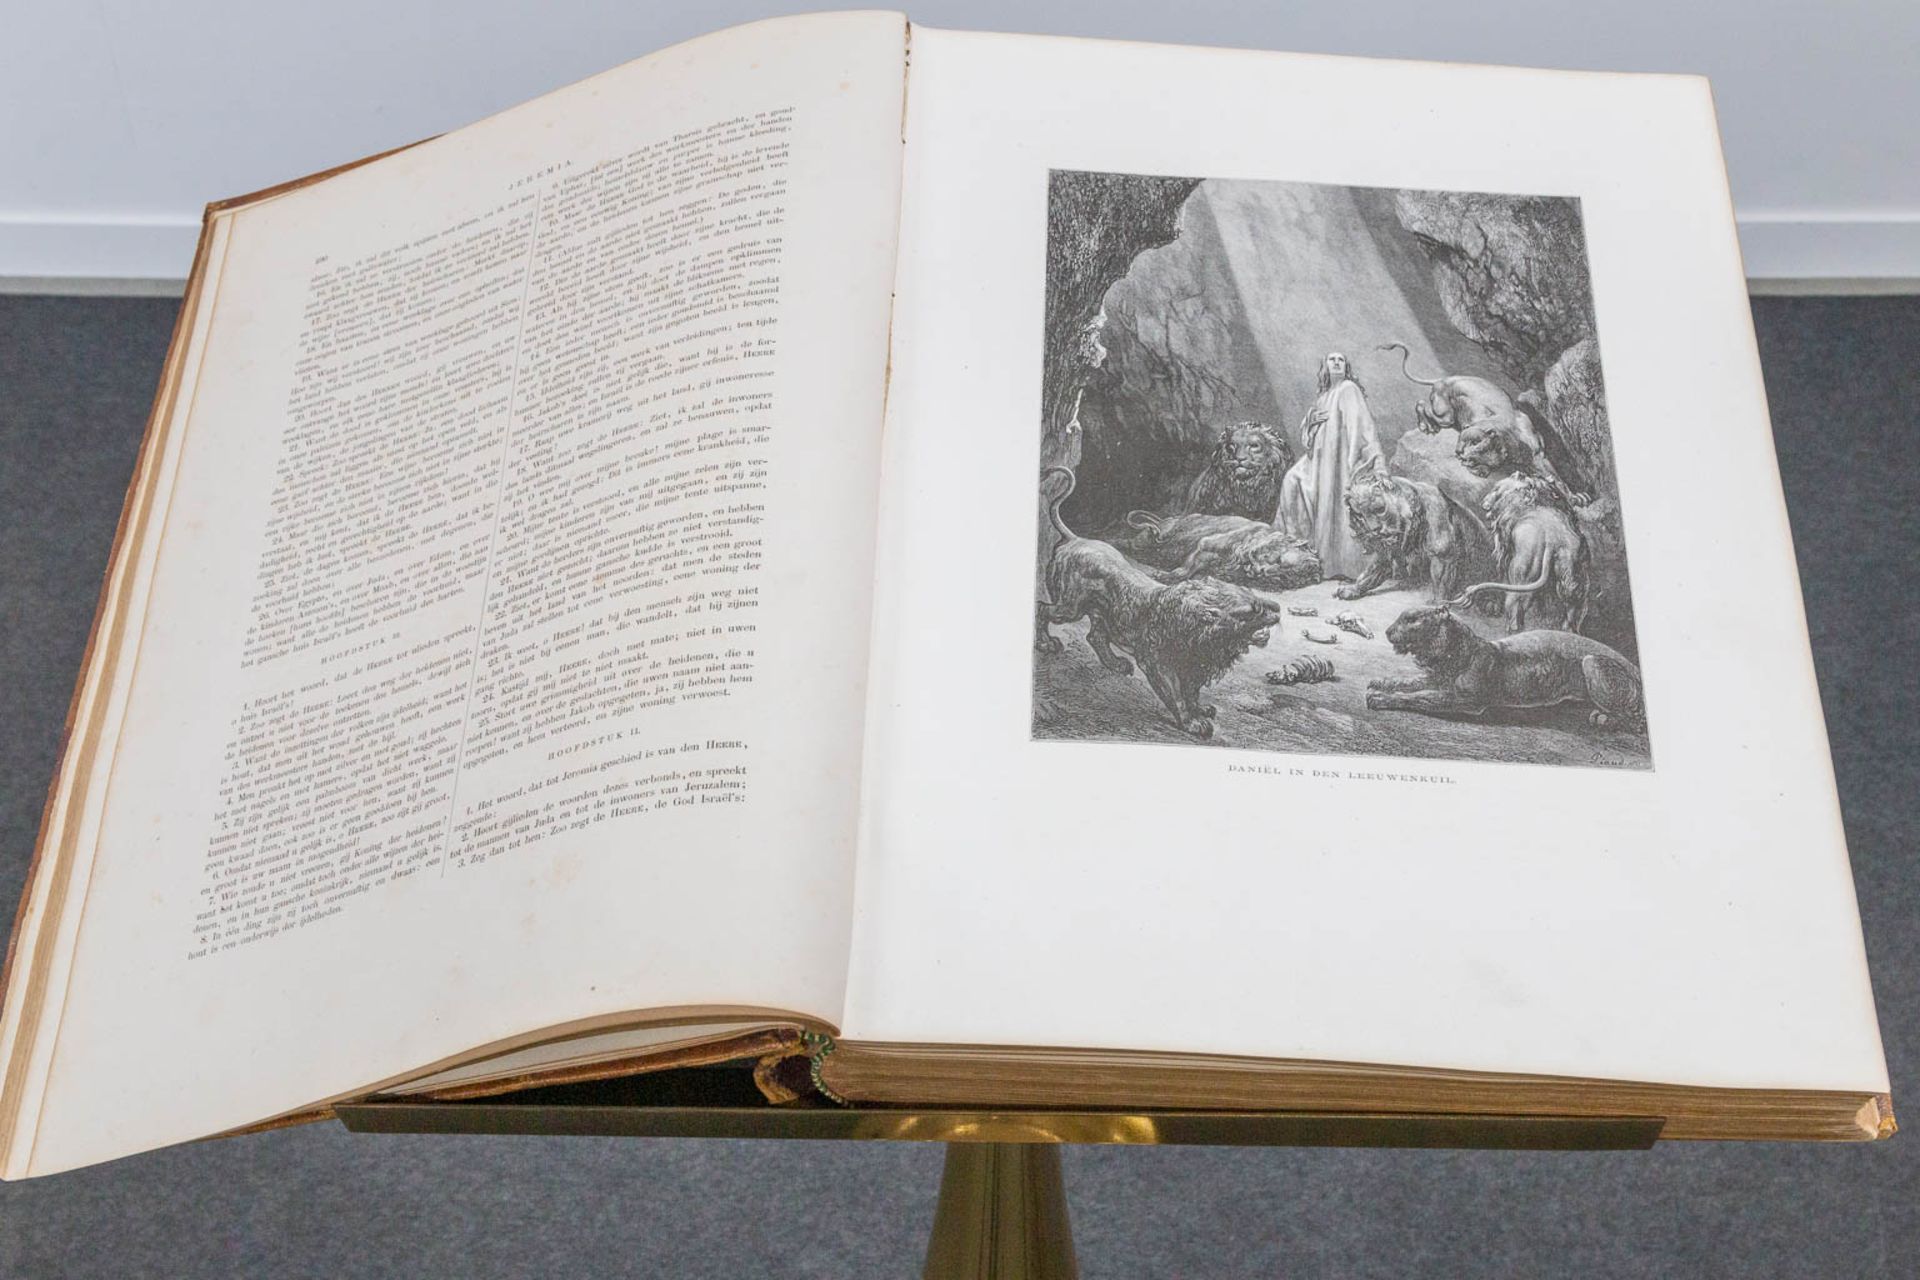 A pair of bibles 'The holy writing', the old and new testament, with 200 images by Gustave Doré. - Image 15 of 15